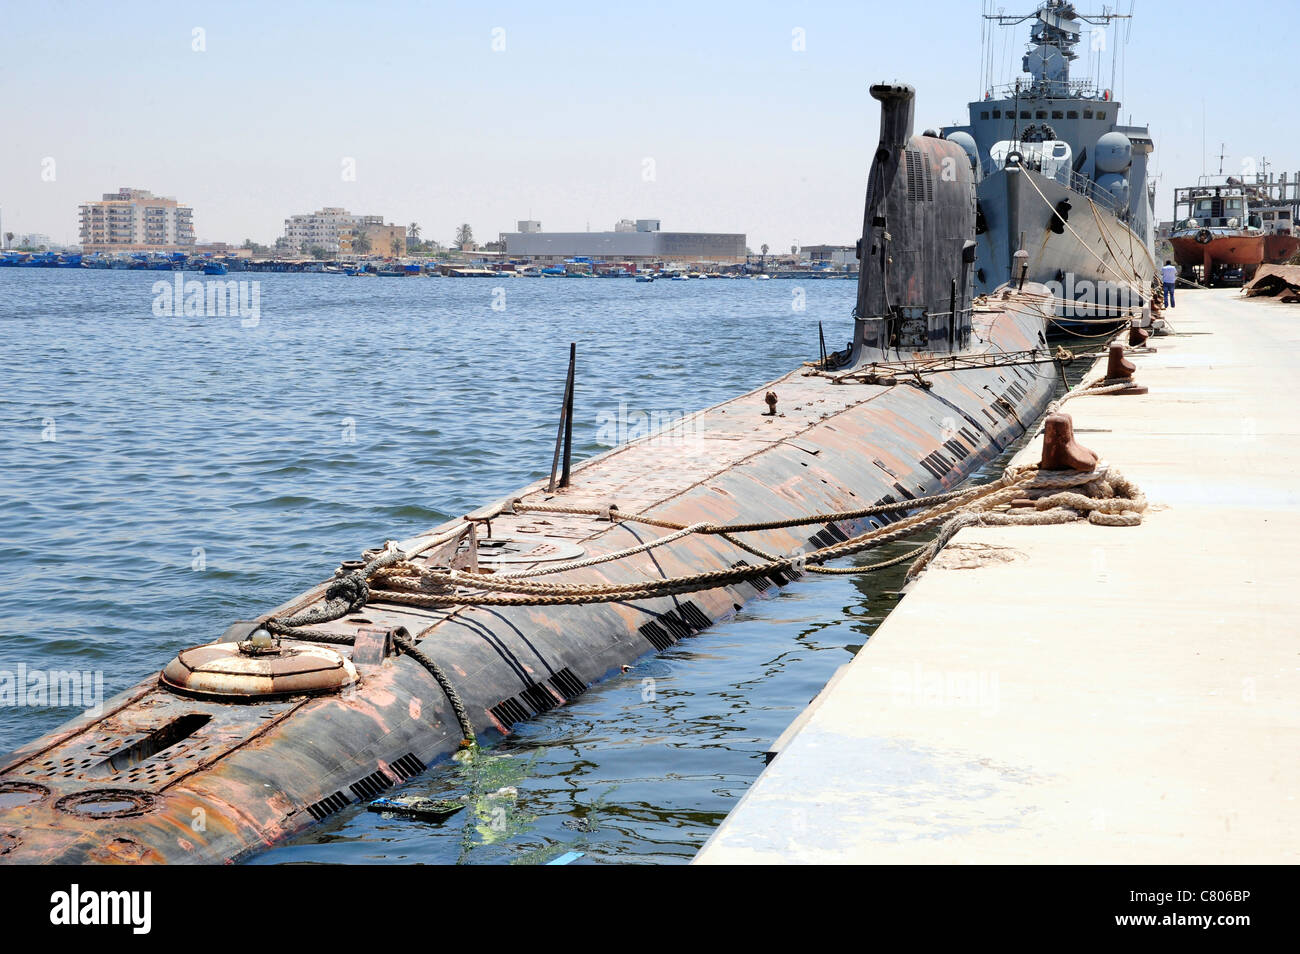 A Libyan Navy Foxtrot-class military submarine moored to the pier in Benghazi, Libya. Stock Photo